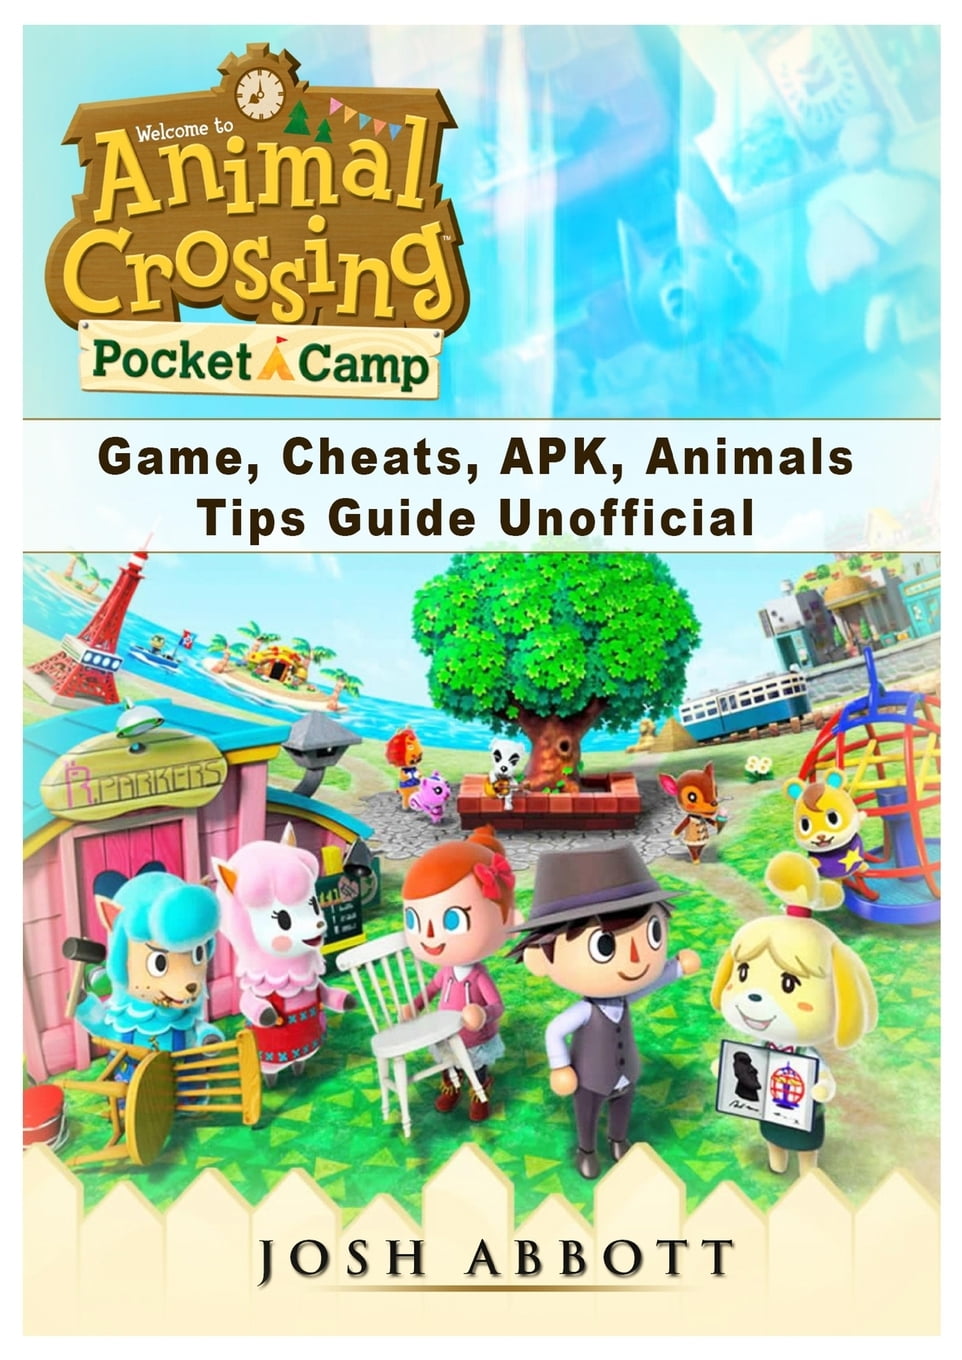 Animal Crossing Pocket Camp Game, Cheats, Apk, Animals, Tips Guide  Unofficial 